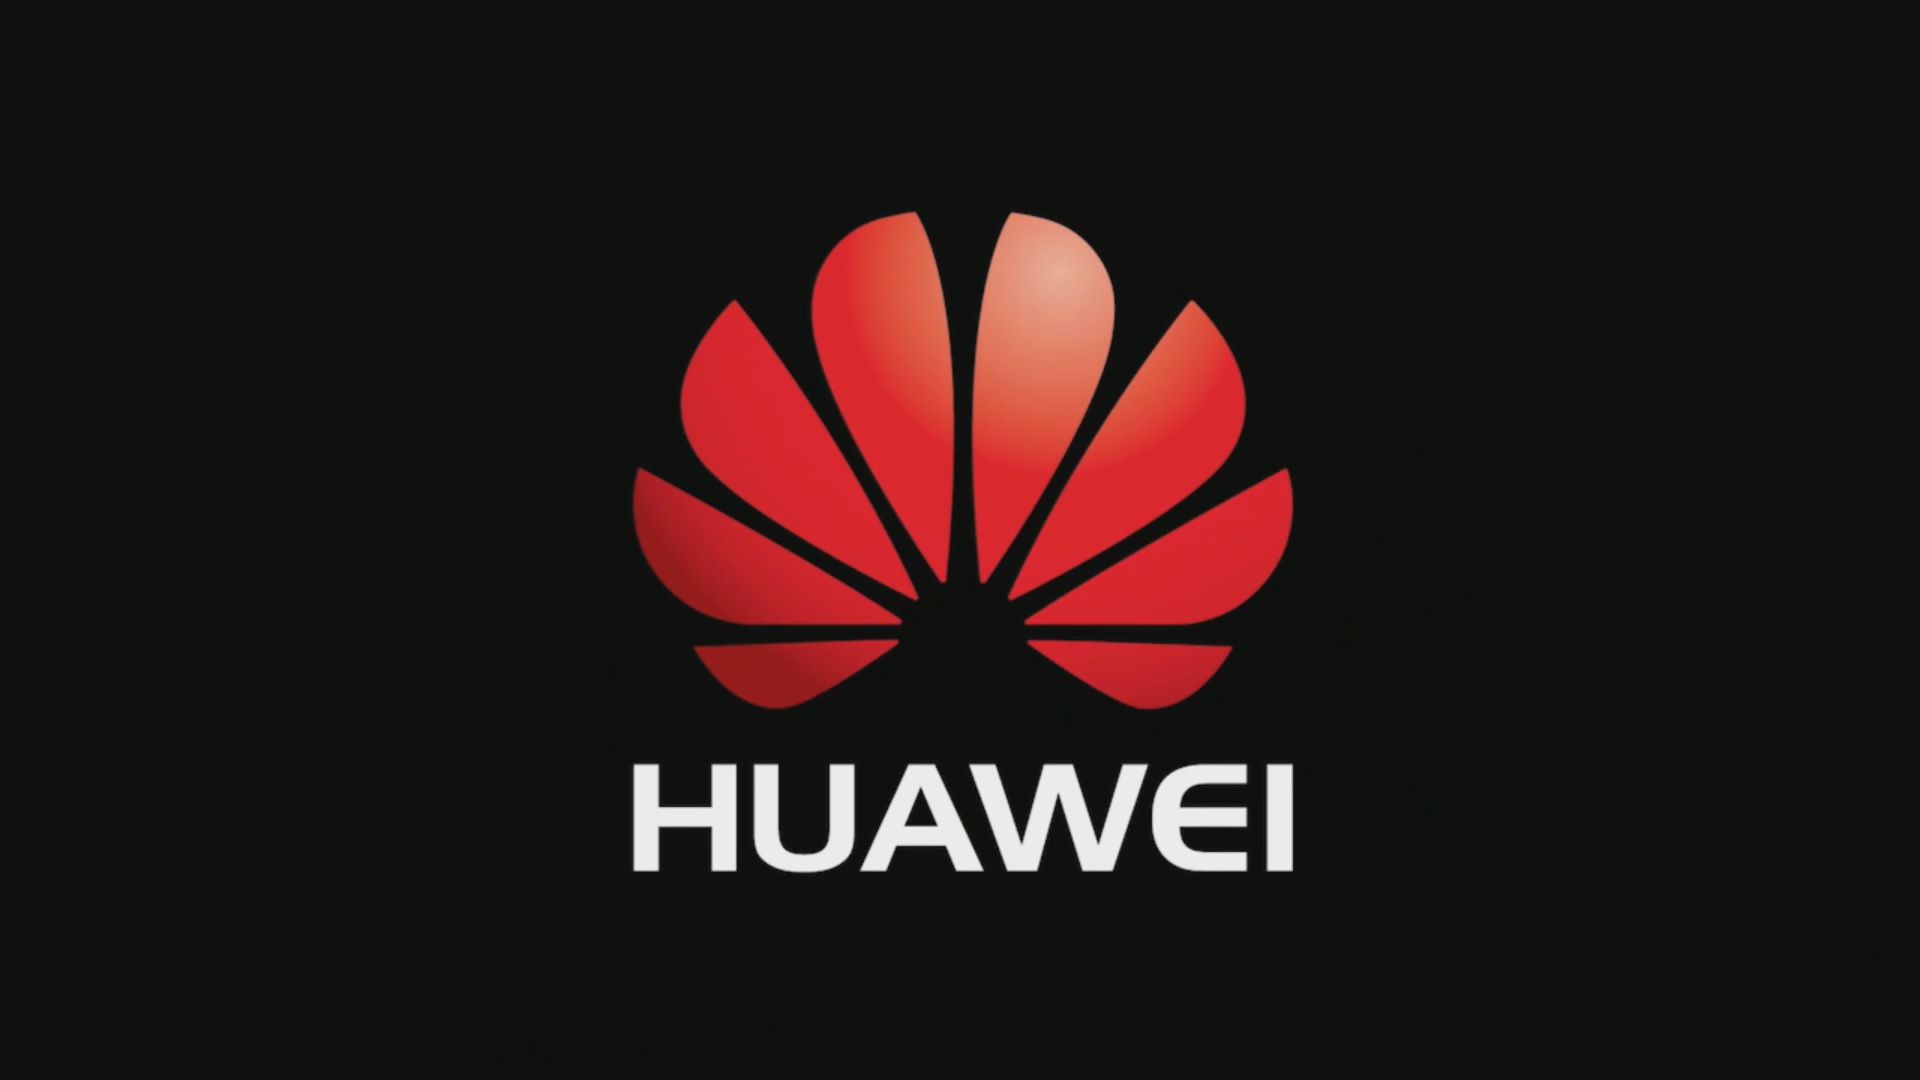 Fixed - Sound Not Works on Huawei Summit